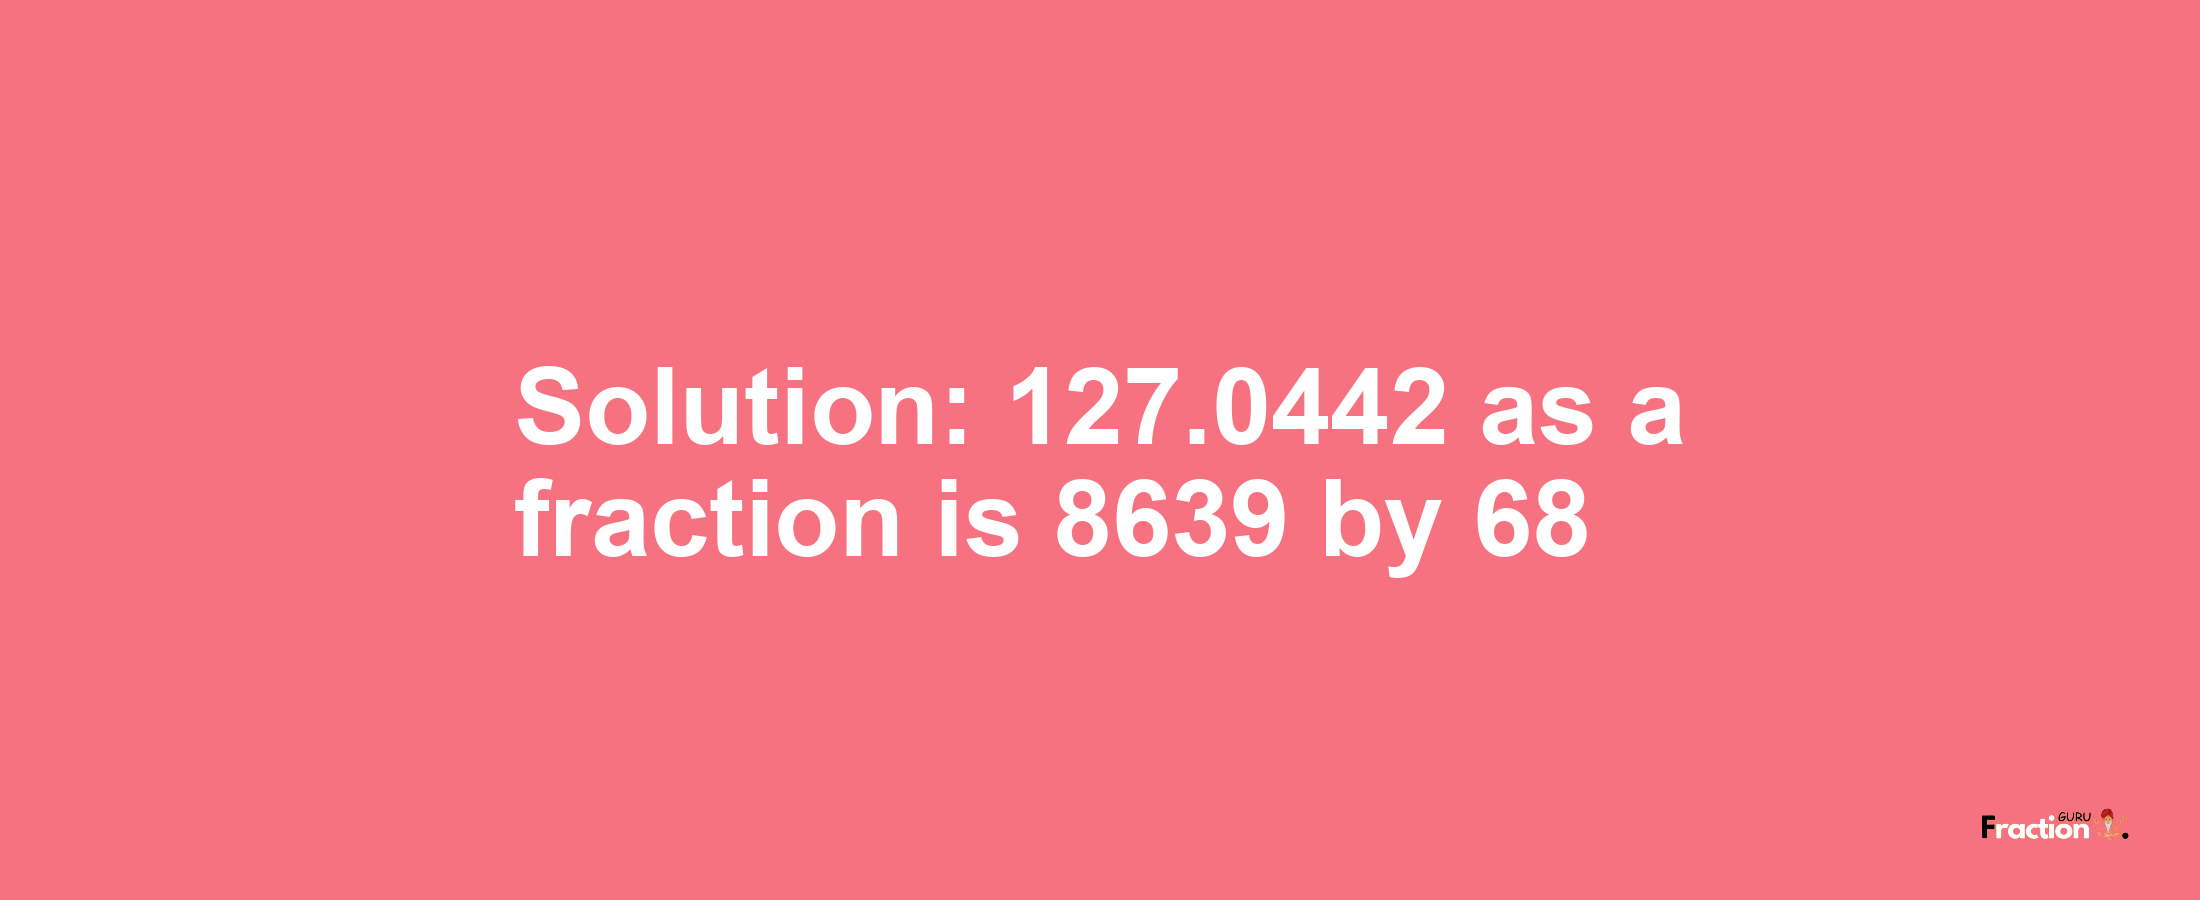 Solution:127.0442 as a fraction is 8639/68